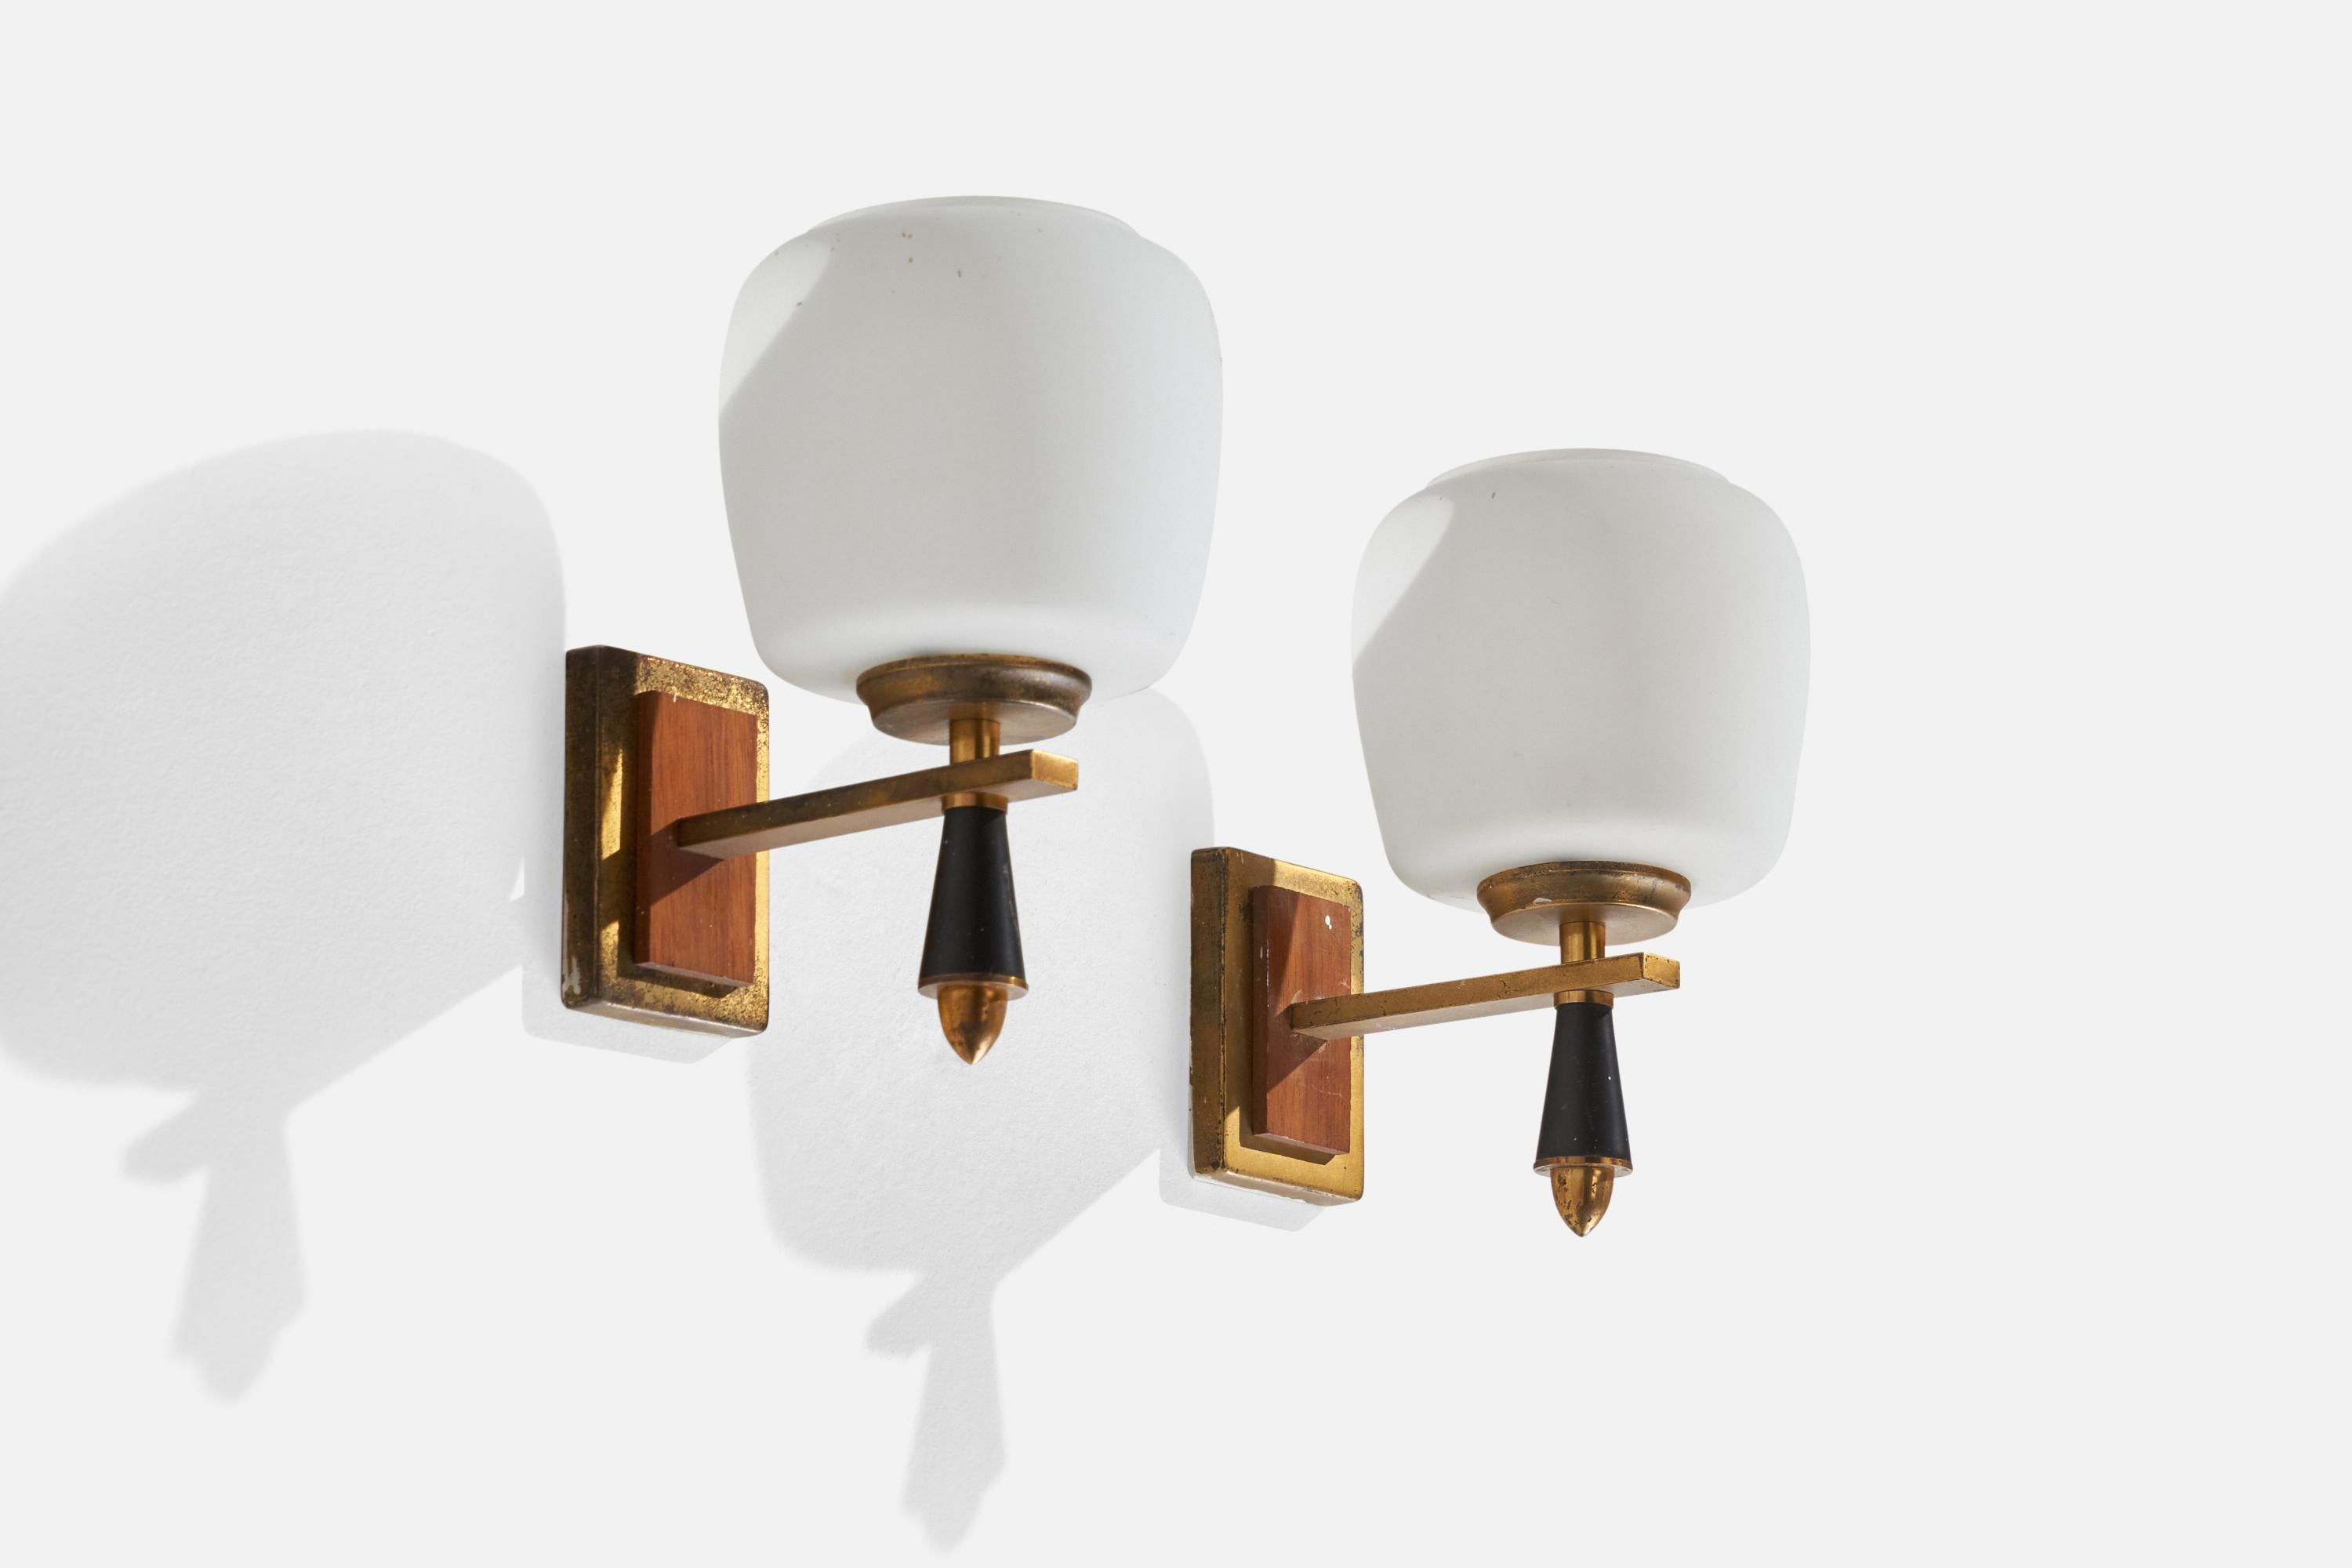 A pair of teak, brass, opaline glass and metal wall lights designed and produced in Italy, 1950s.

Overall Dimensions (inches): 8.5” H x 5” W x 7” D
Back Plate Dimensions (inches): 3.75” H x 2.5” W x .50”  D
Bulb Specifications: E-14 Bulb
Number of